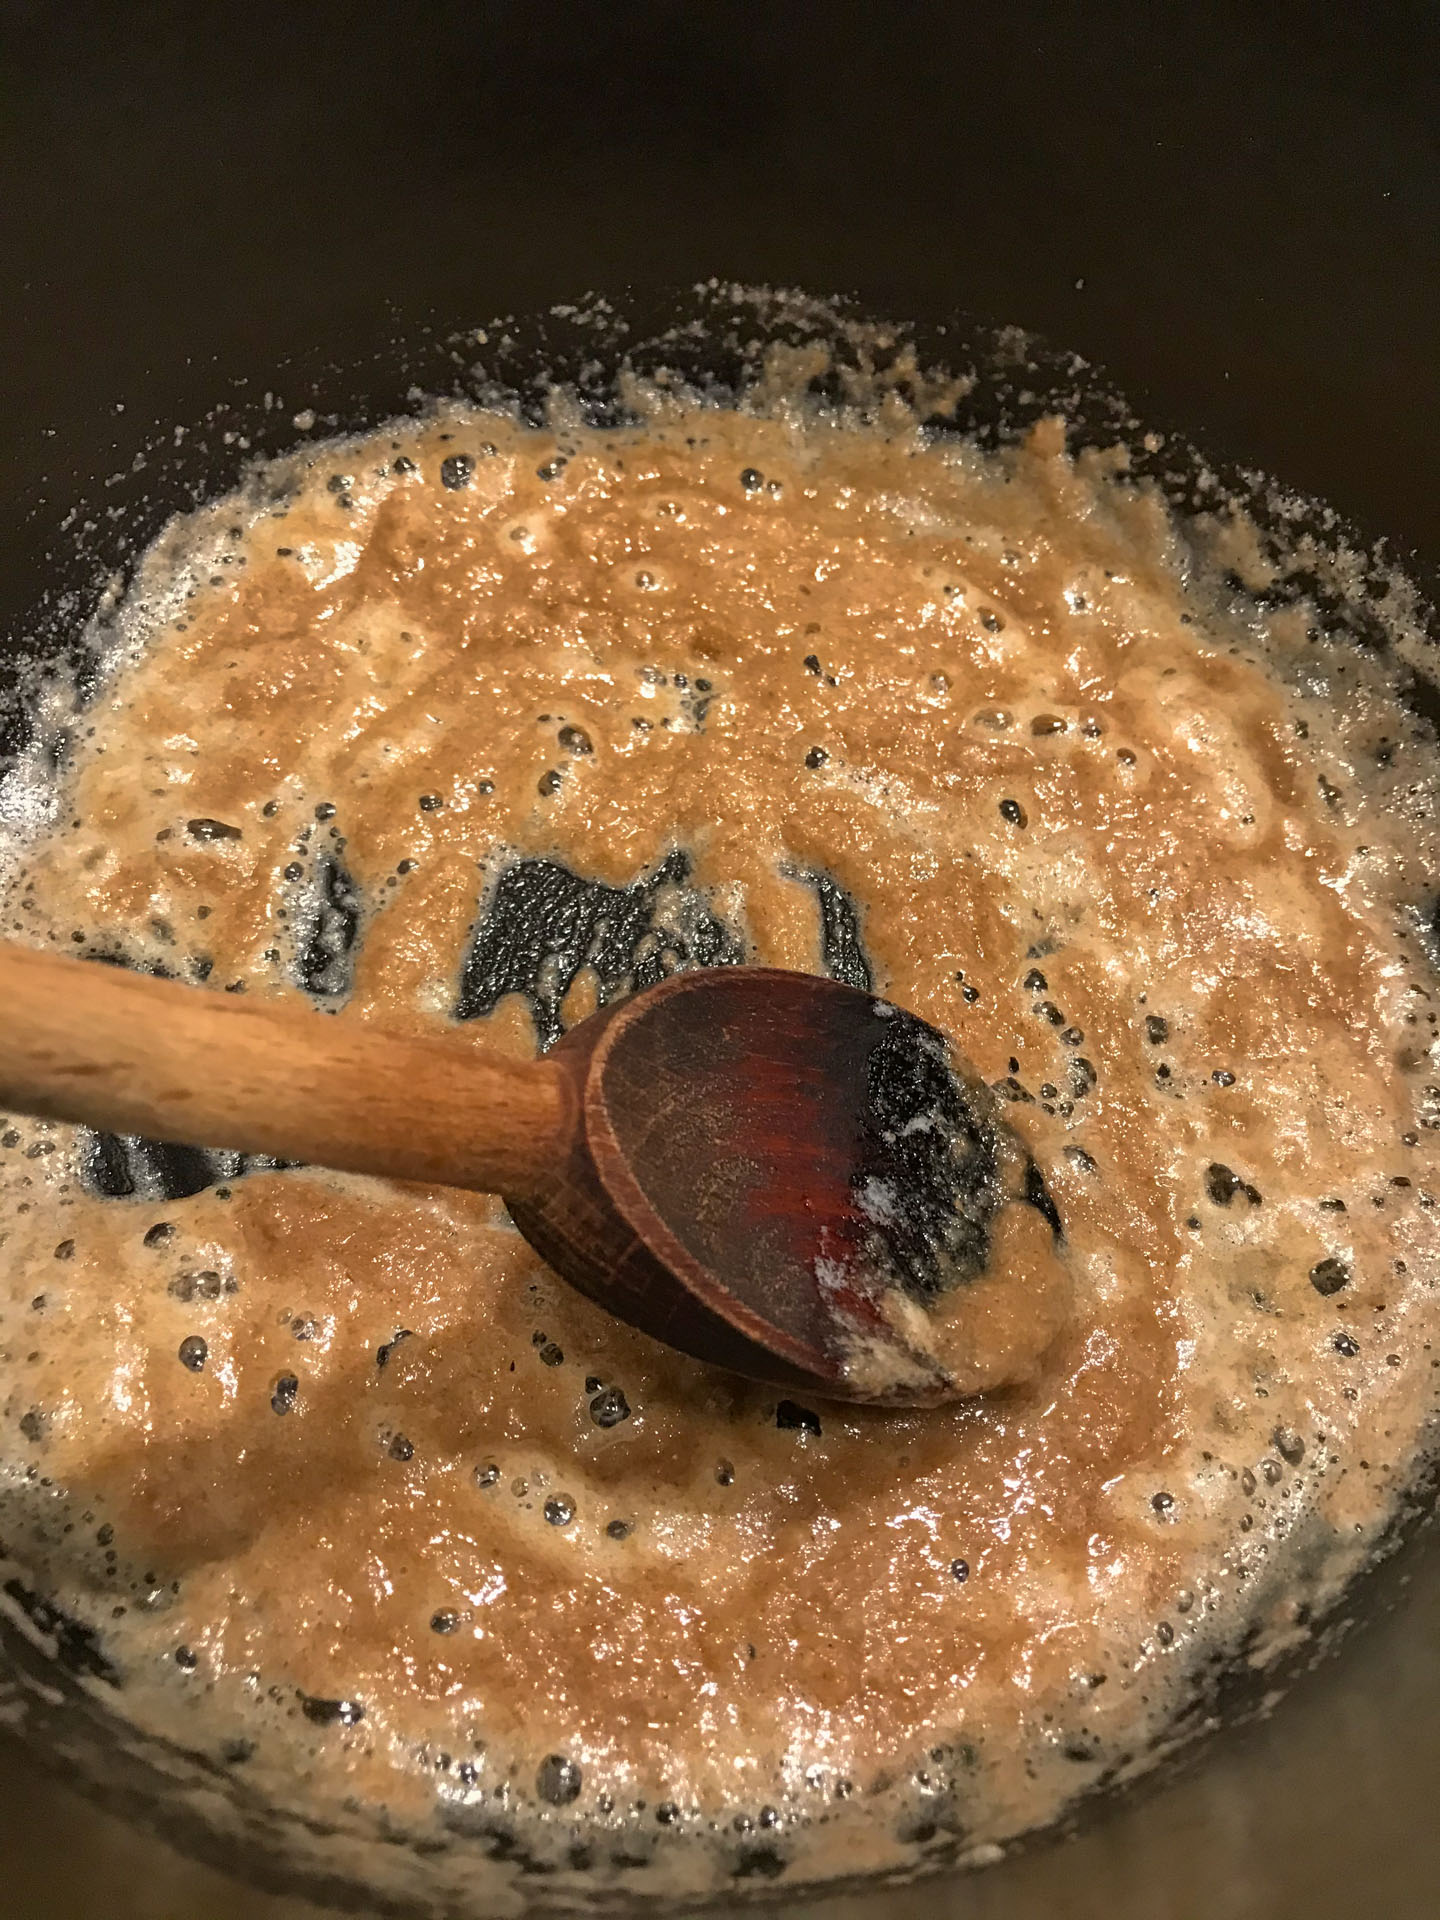 roux - melted butter and whole wheat flour